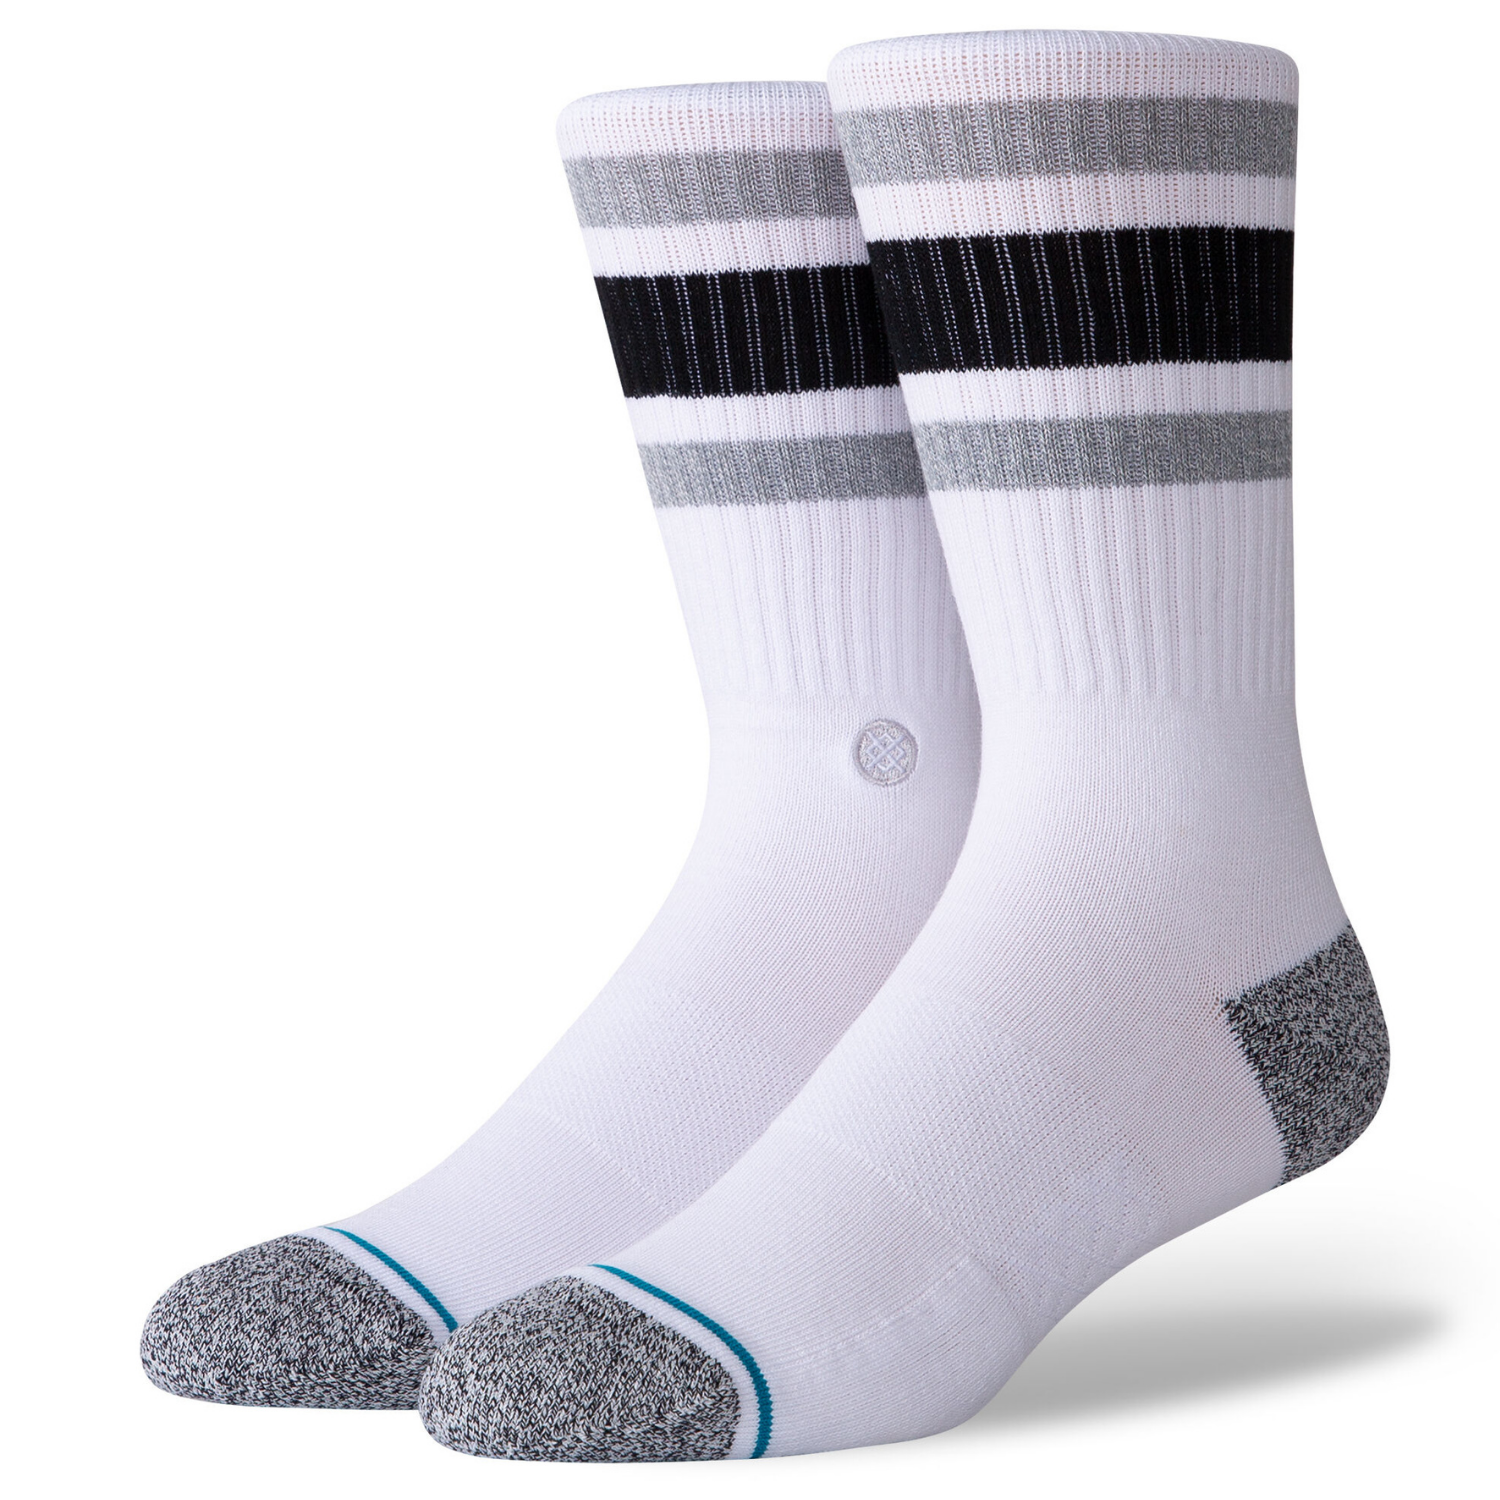 a pair of white mid calf socks seen on a foot form, featuring a heather grey toe and heel with 3 monochromatic stripes near the cuff